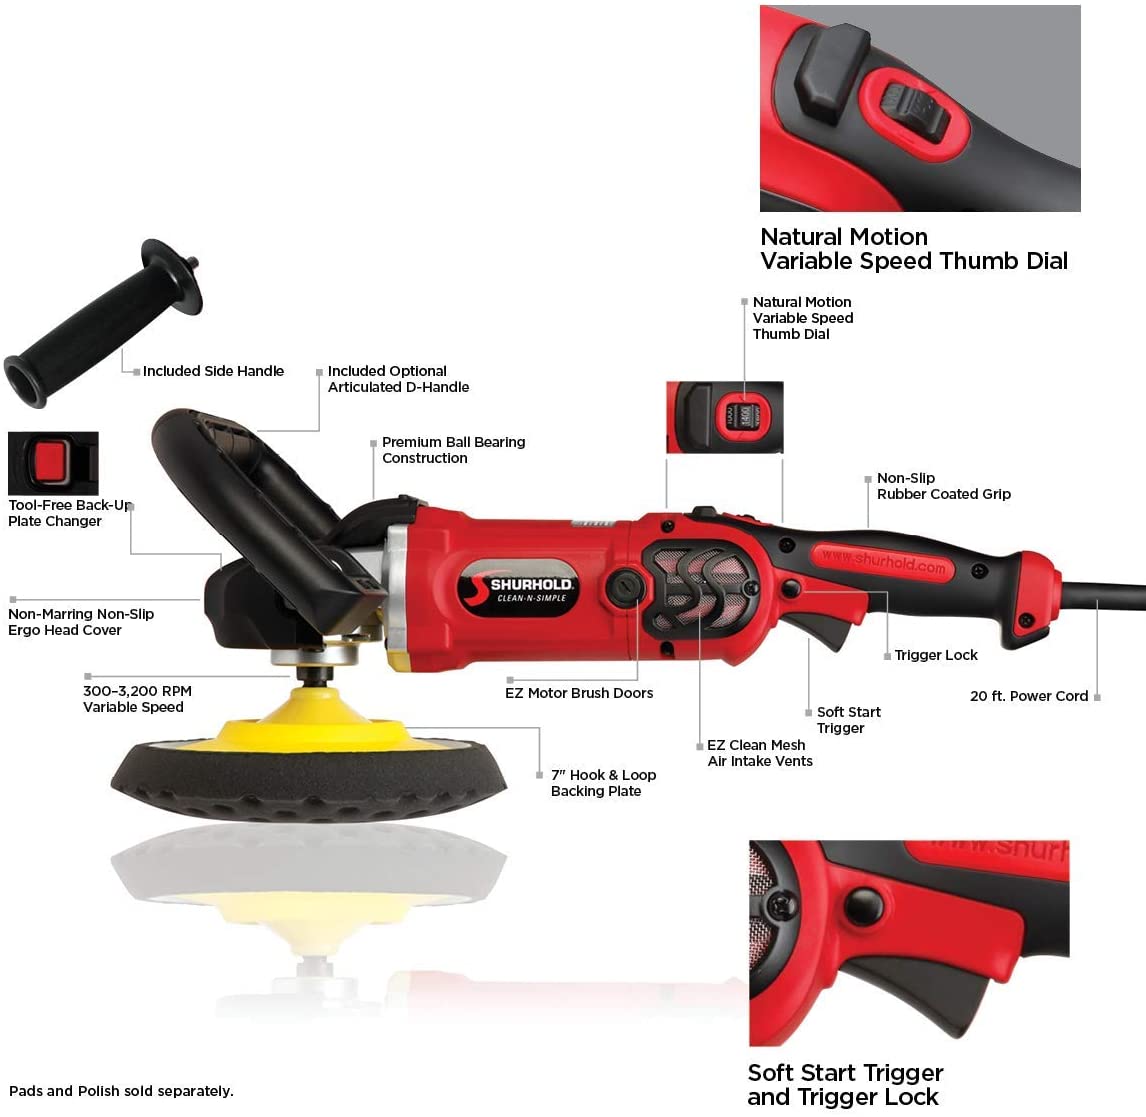 Shurold Rotary Polisher showing all features and attachments